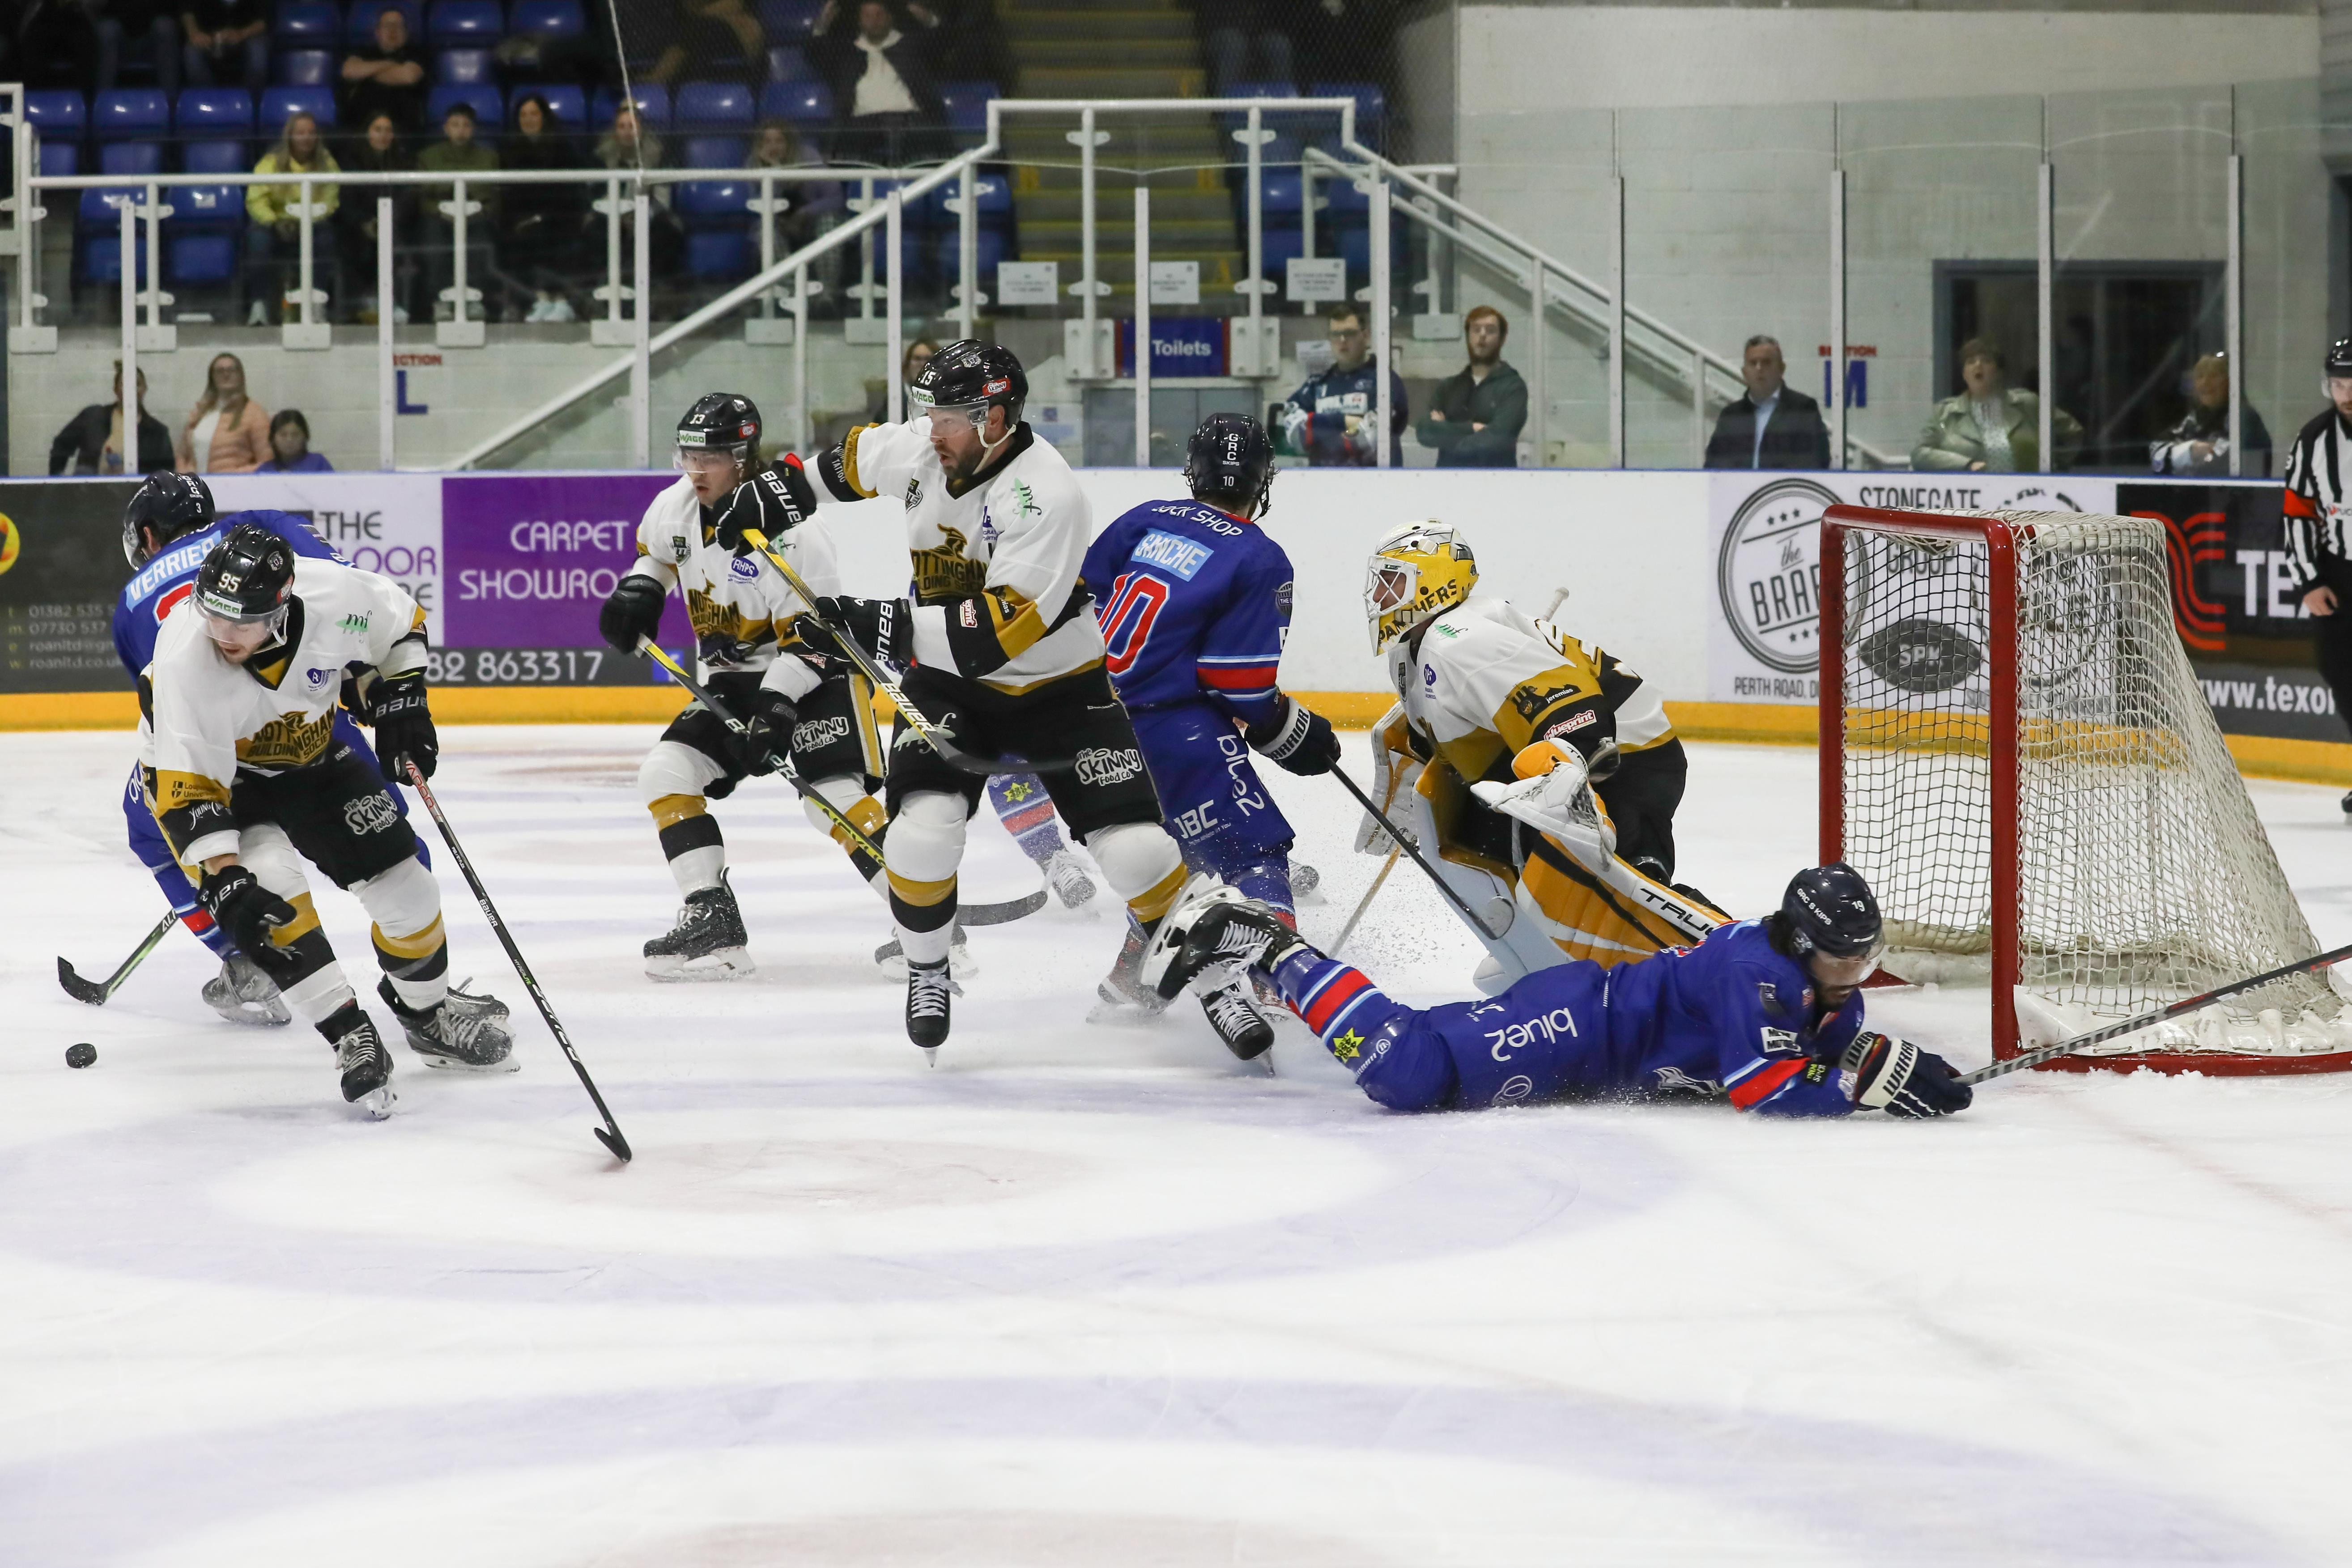 ELITE LEAGUE: STARS 4-2 PANTHERS Top Image